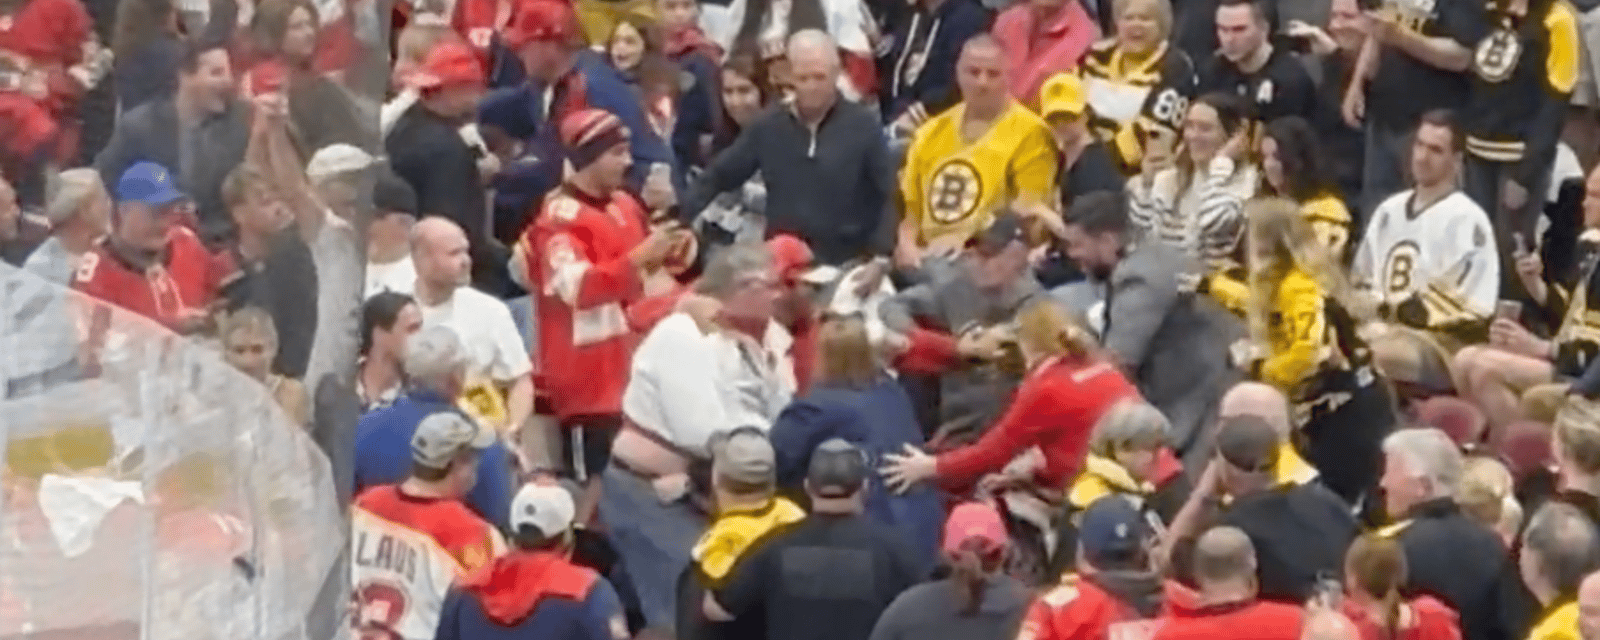 Brawl between Bruins and Panthers fans caught on video! 